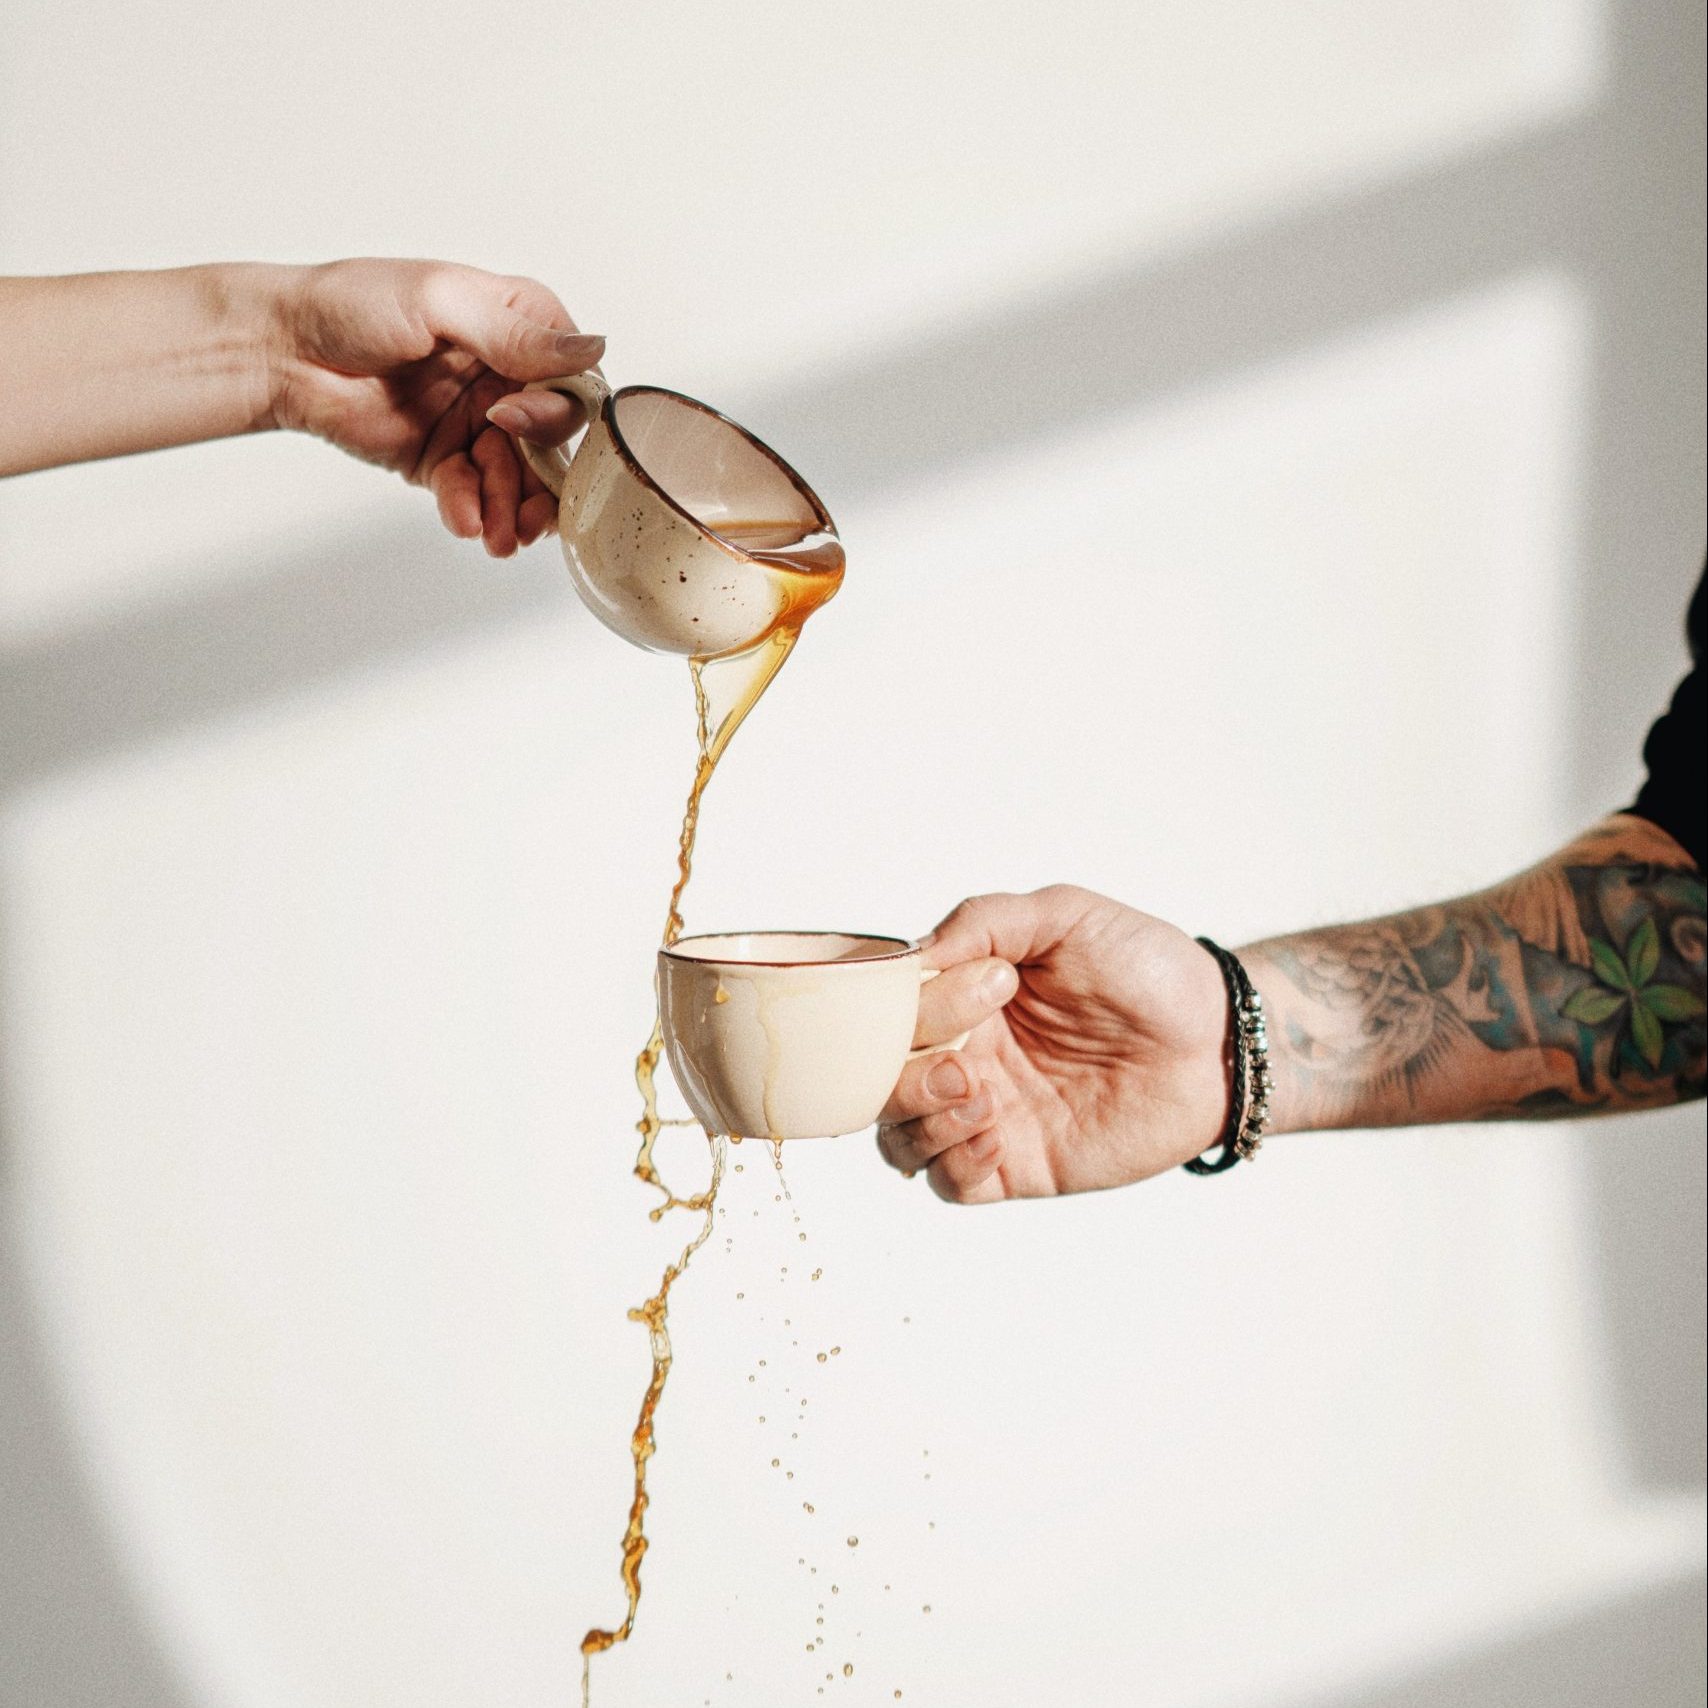 Coffee being poured into another cup